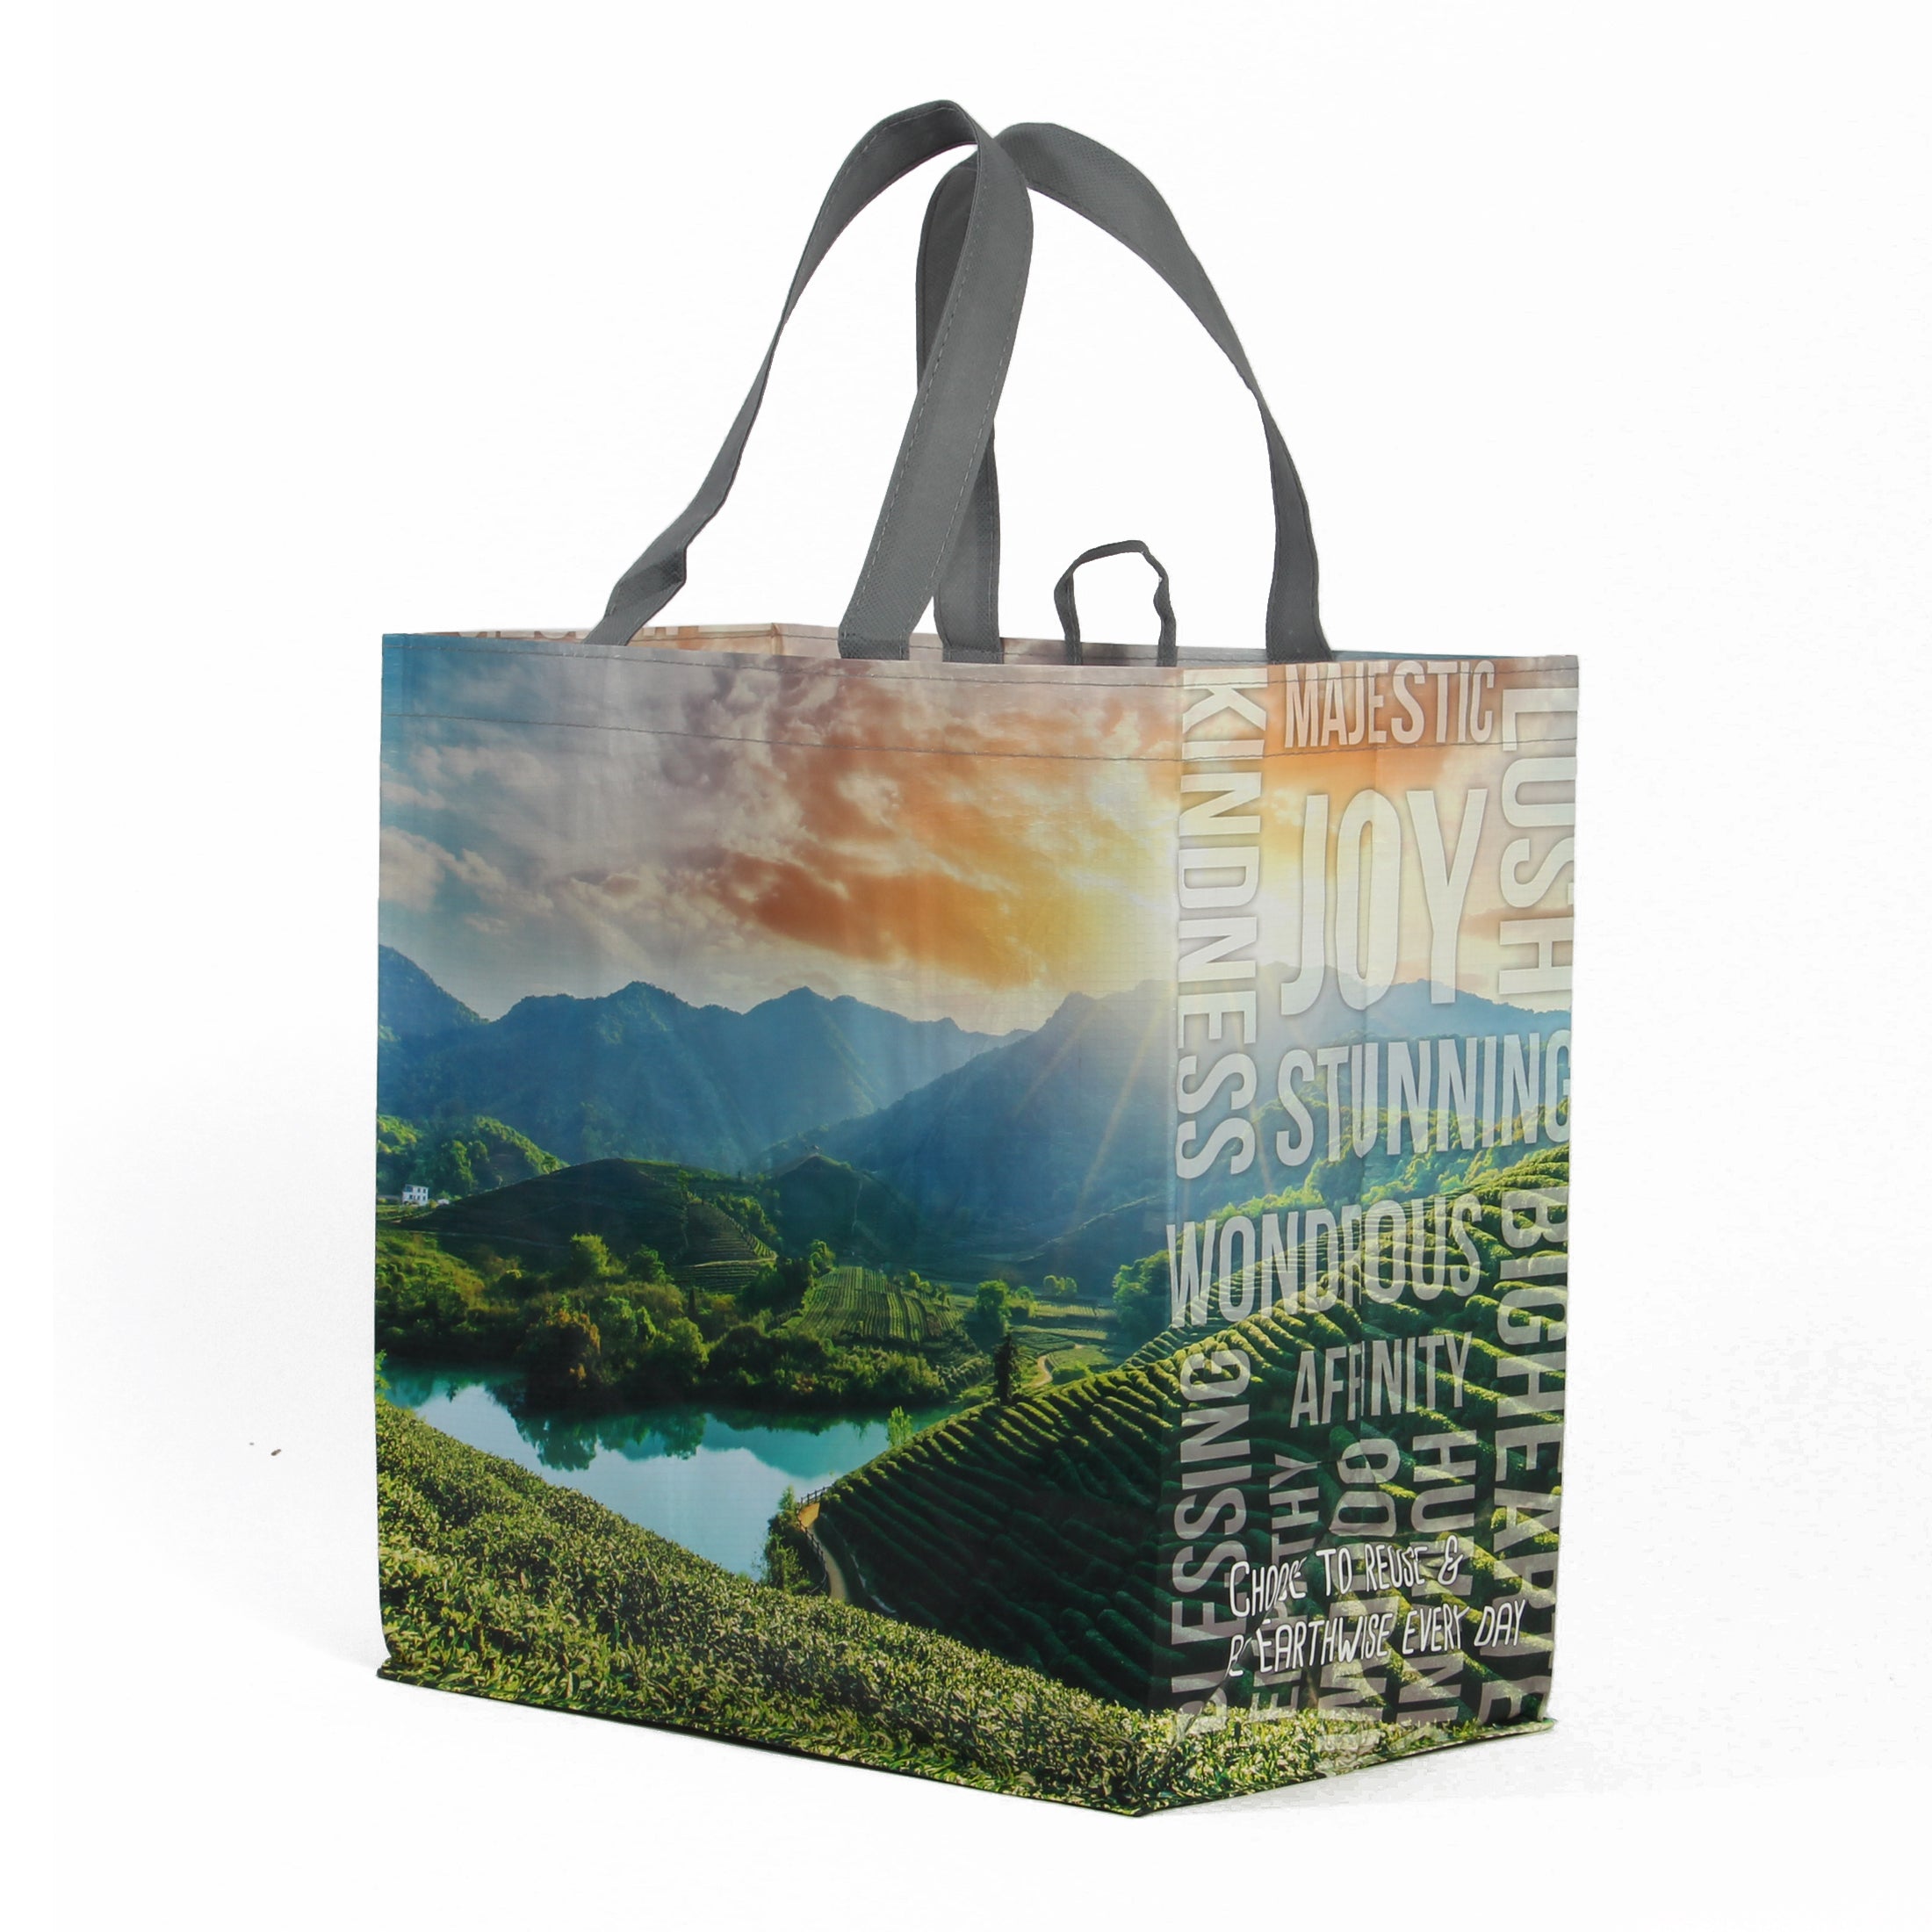 Reusable Shopping Bags for sale in Rocky Point, North Carolina